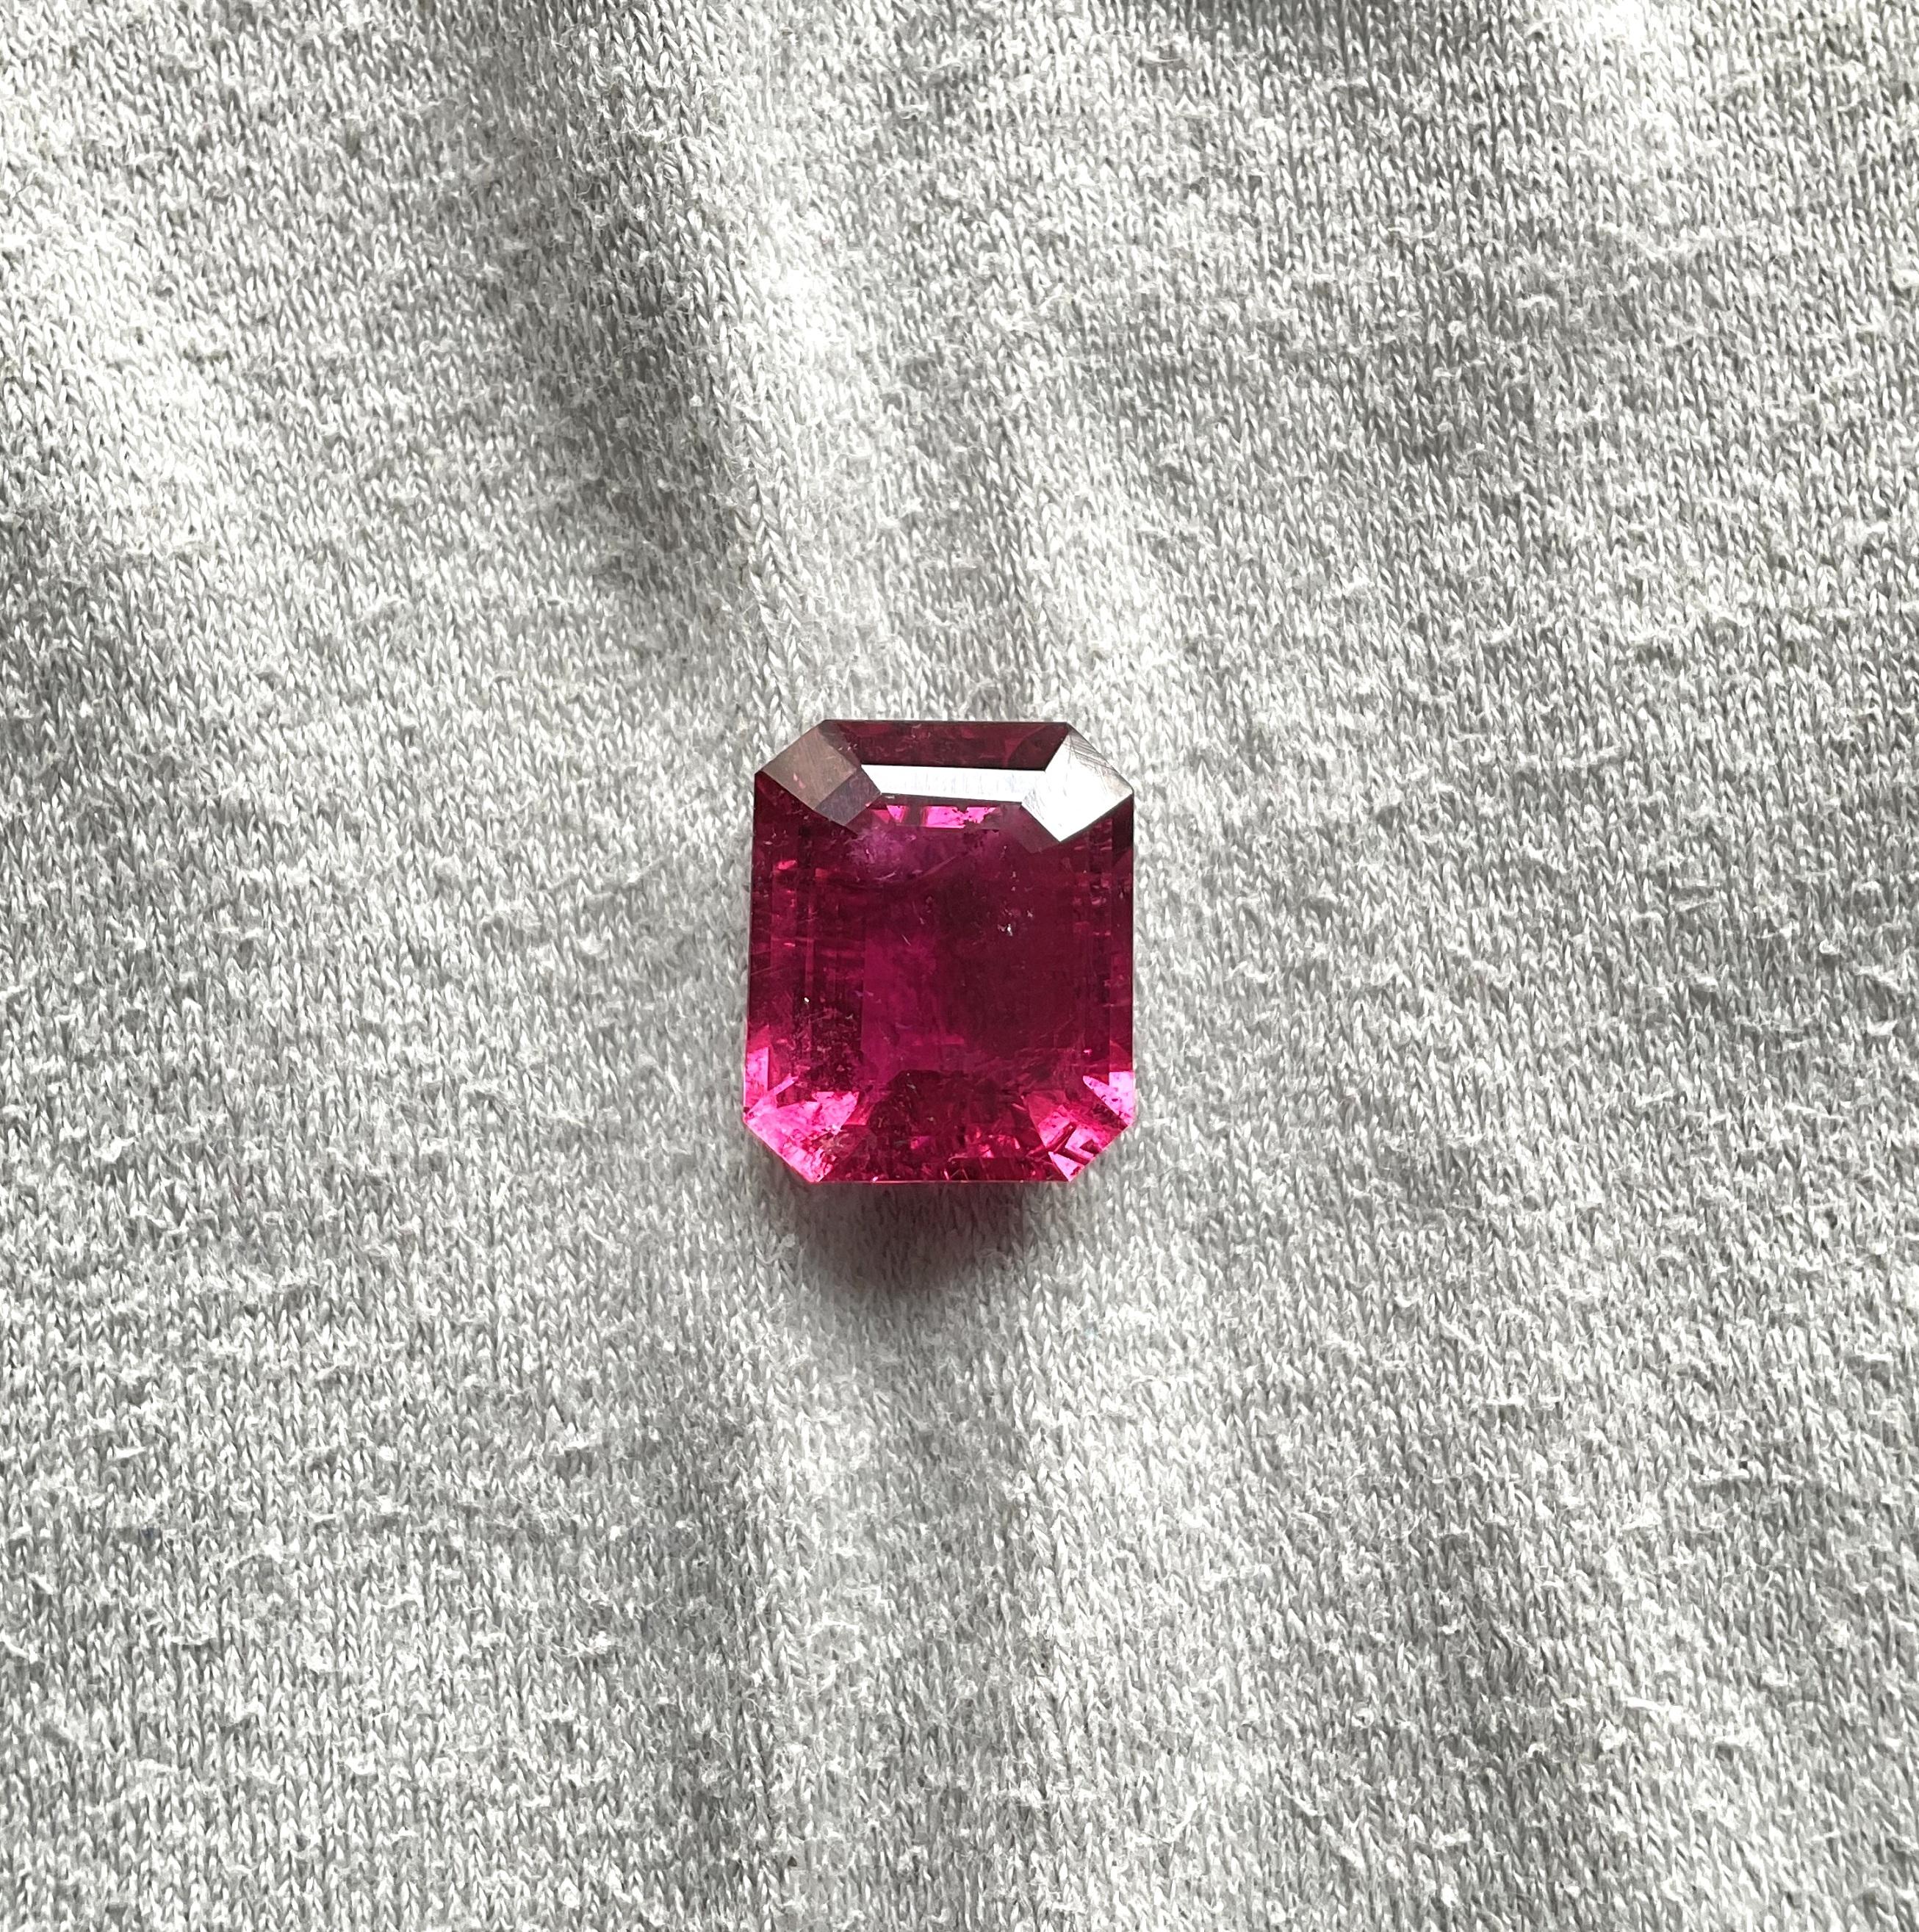 Contemporary 11.40 Carats Rubellite Tourmaline Octagon Cut Stone For Fine Jewelry Natural gem For Sale